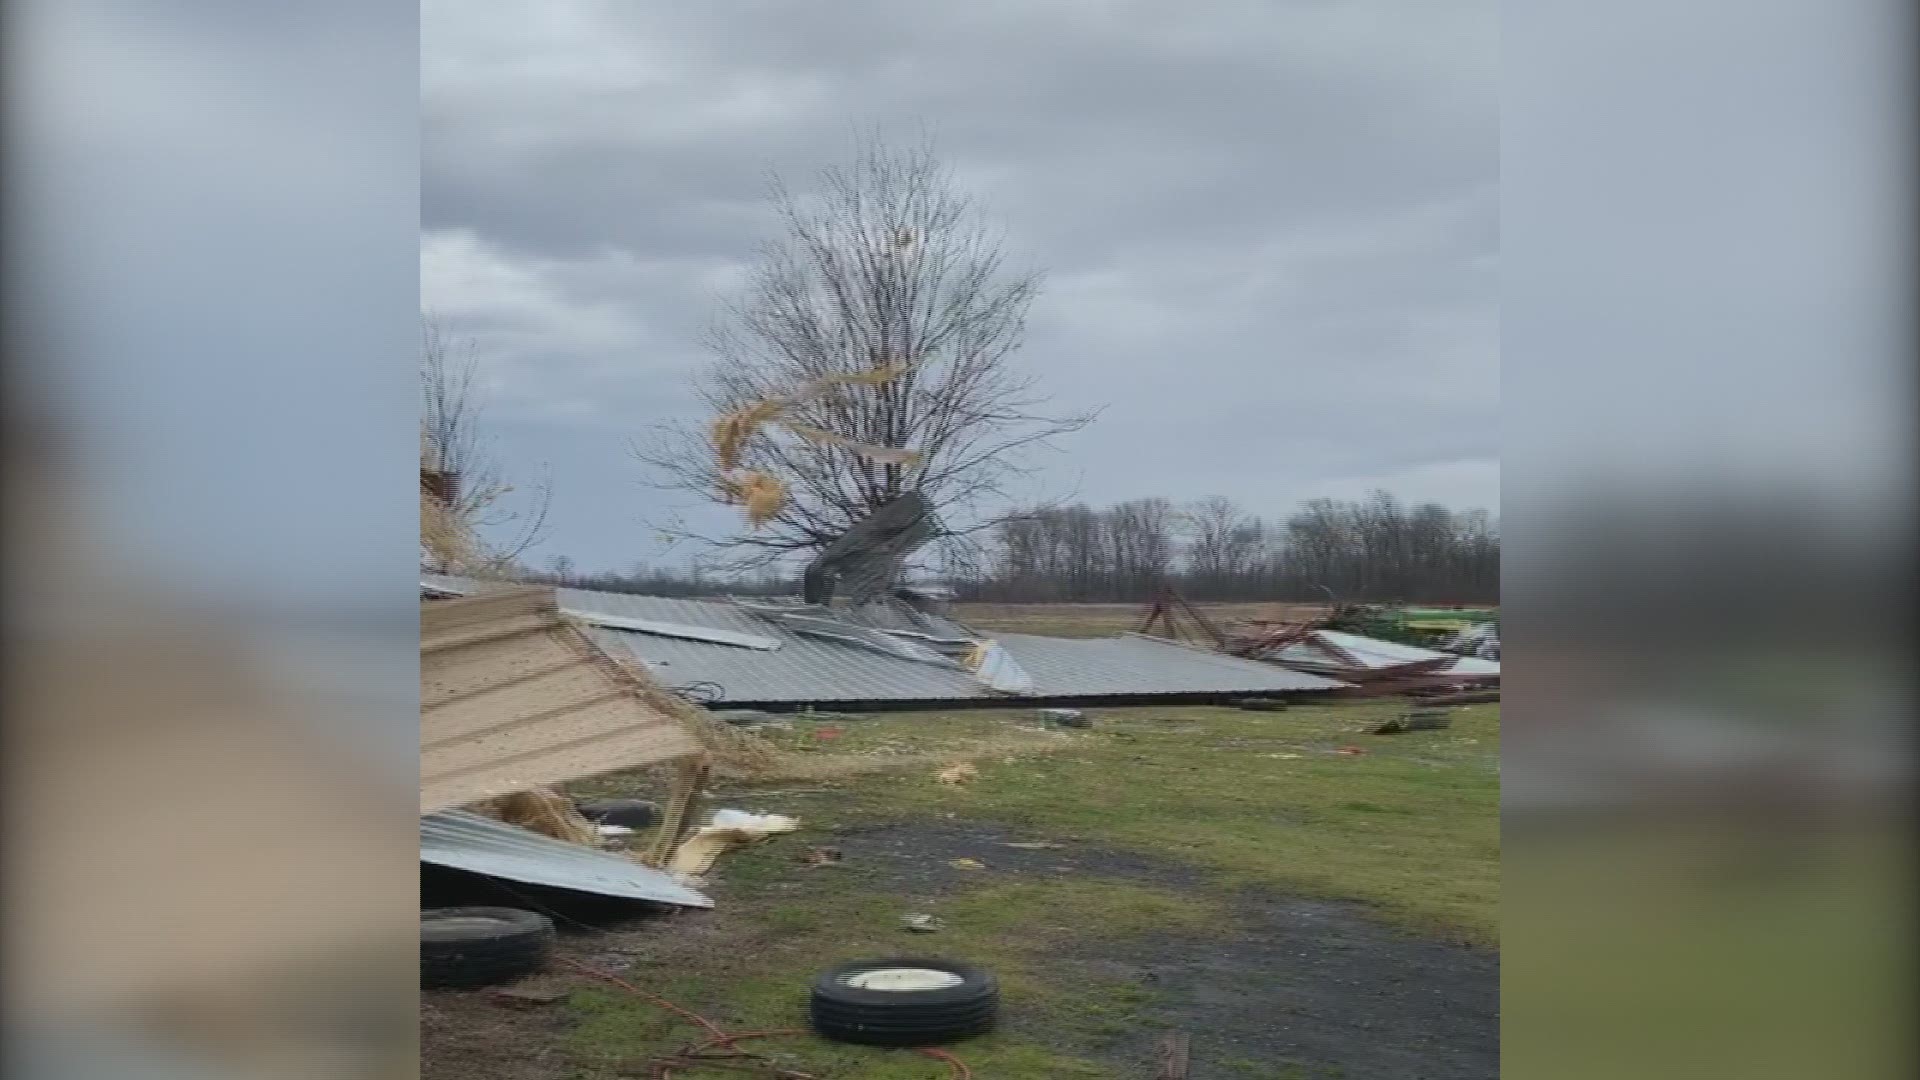 Weather damage to shop near south of Carlisle, located at 381 and Skipper Lane